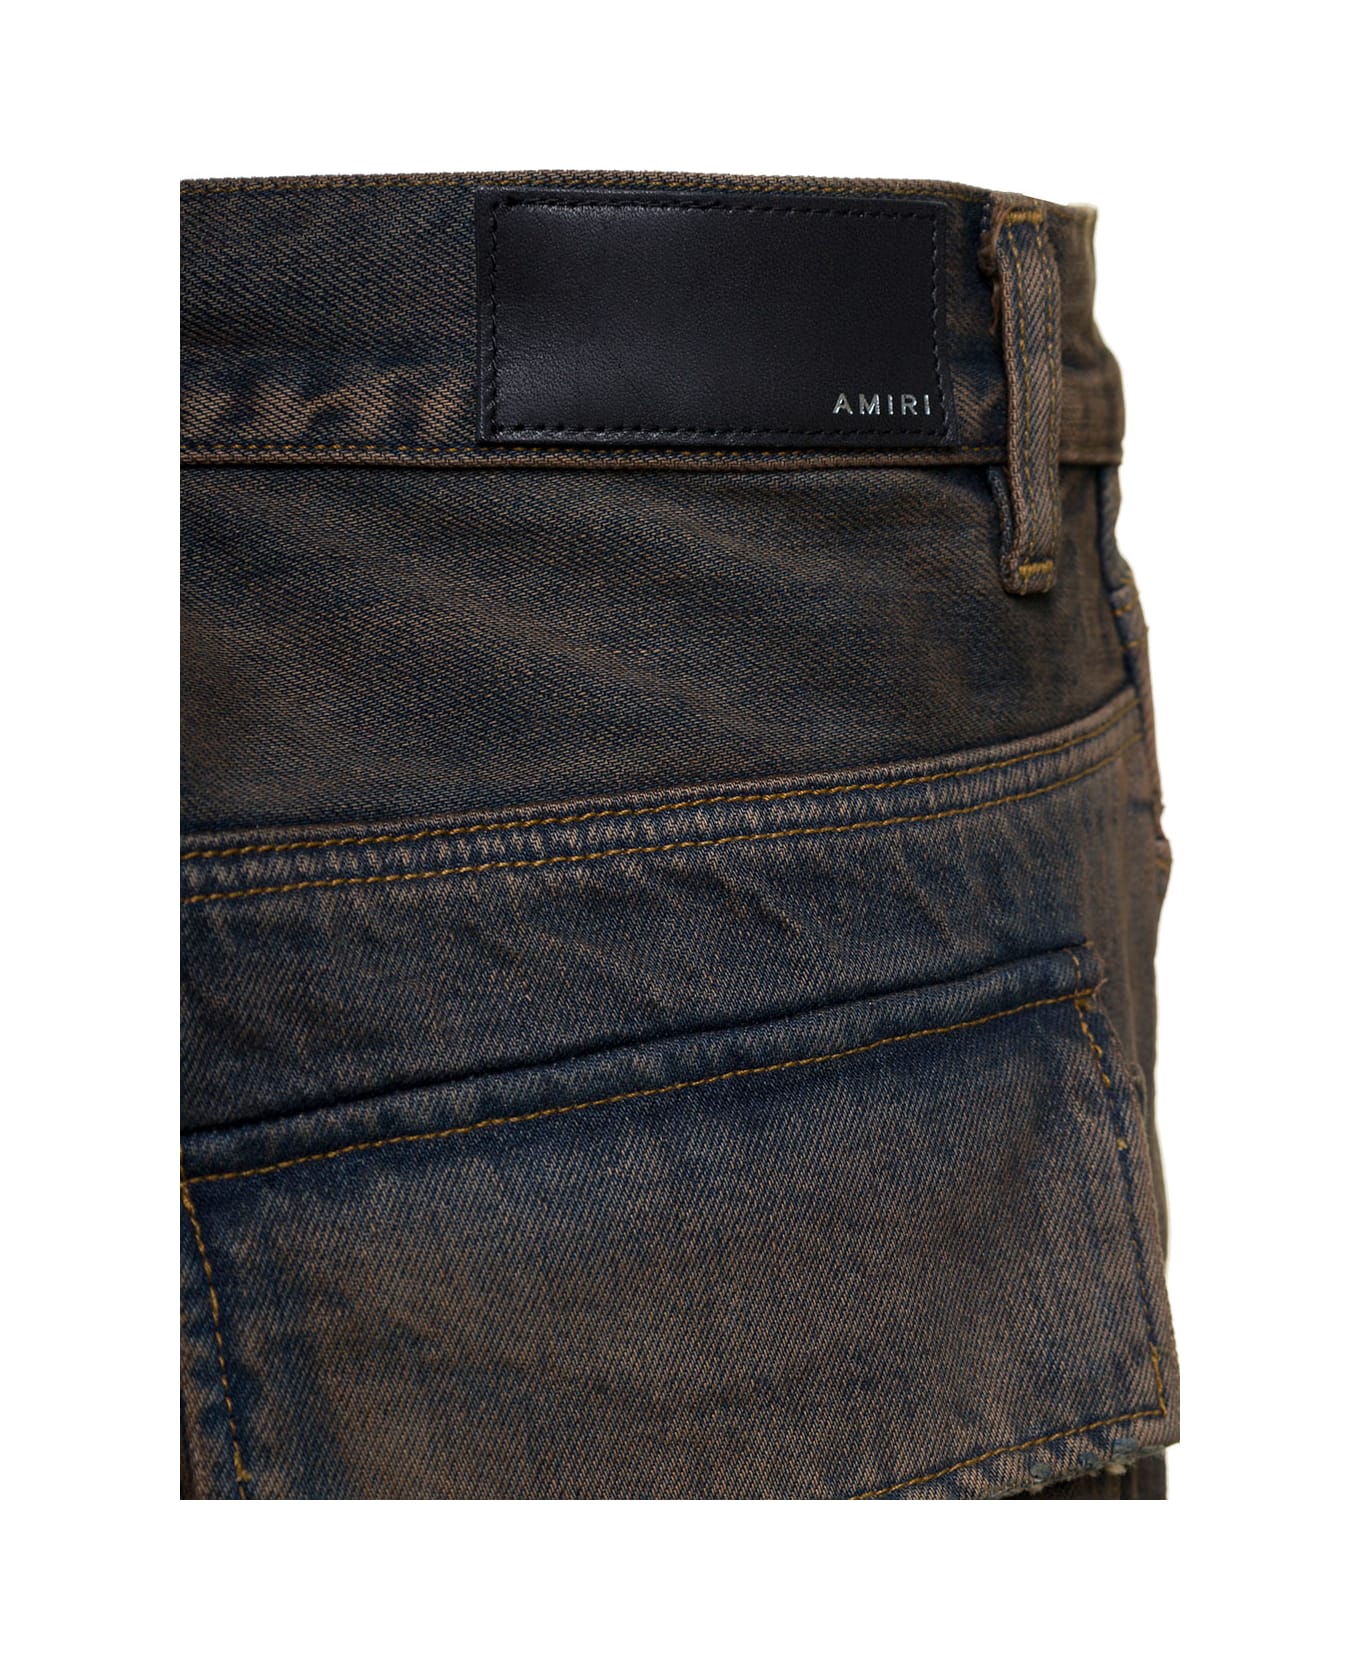 AMIRI Brown Five-pocket Jeans With Faded Effect And Rips Details In Cotton Denim Man - Blu